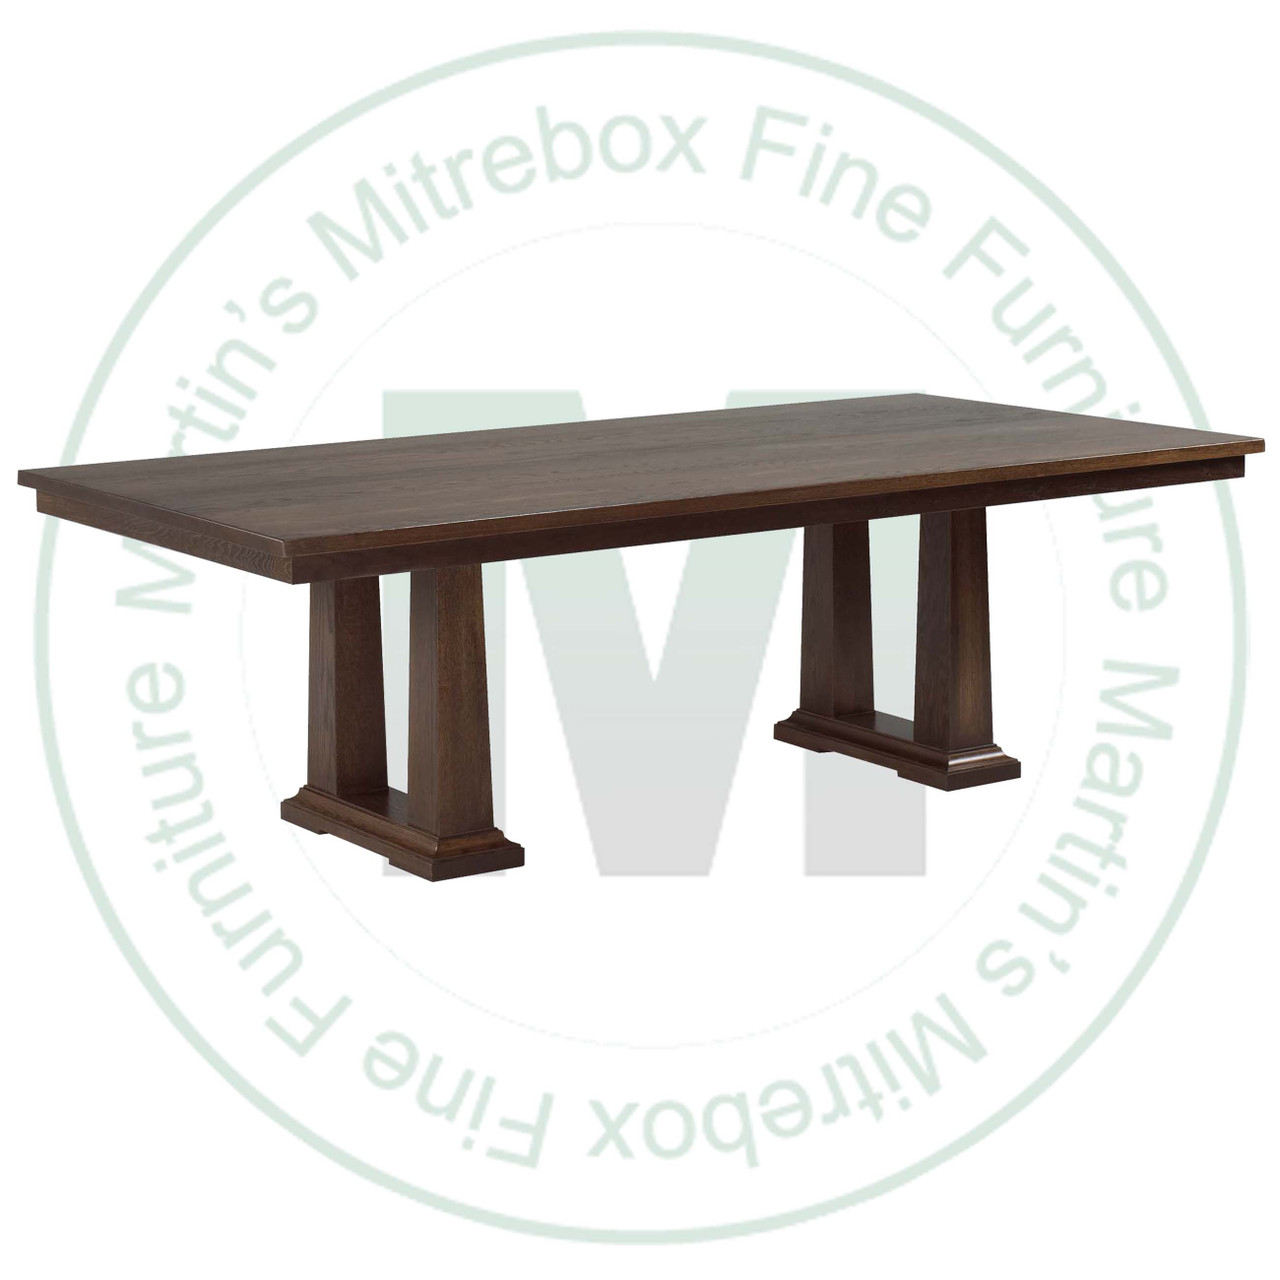 Maple Acropolis Extension Double Pedestal Table 48''D x 96''W x 30''H With 3 - 12'' Leaves Table Has 1.75'' Thick Top